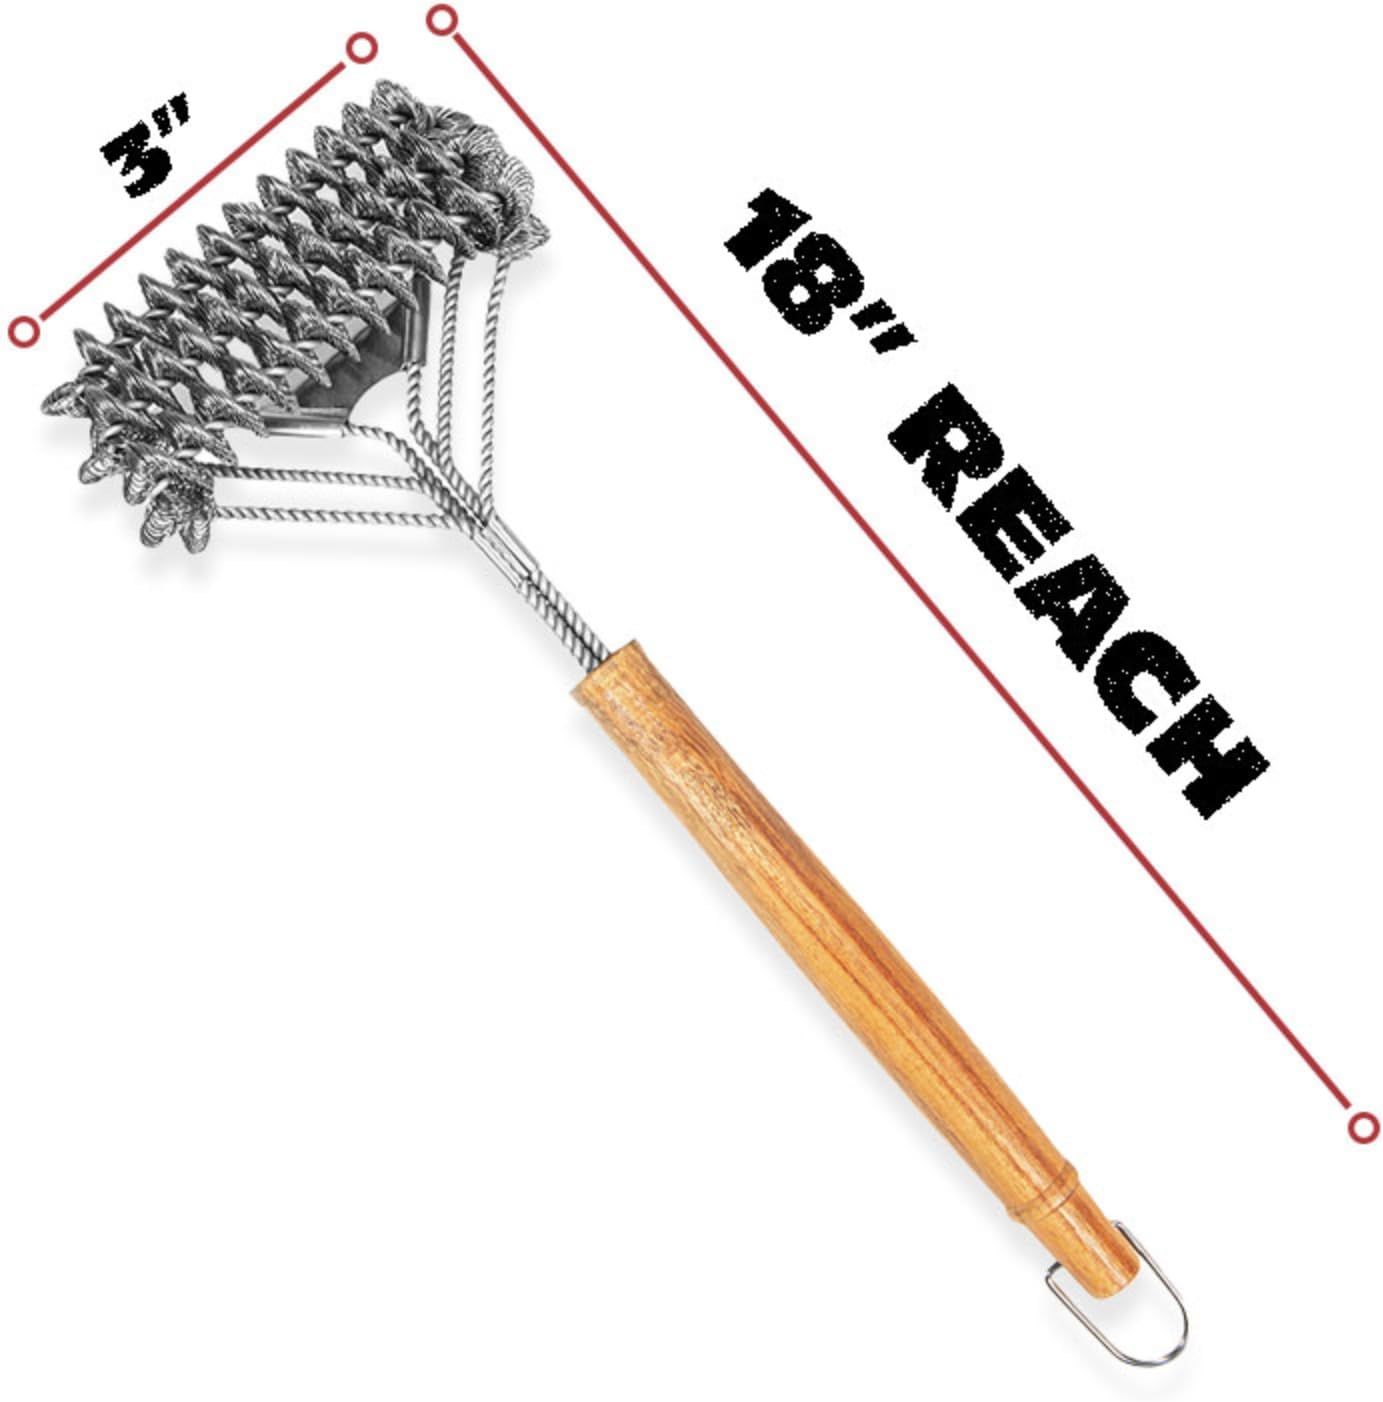 https://media.karousell.com/media/photos/products/2023/10/27/bbqaid_grill_brush_for_outdoor_1698400398_5cf7bab2_progressive